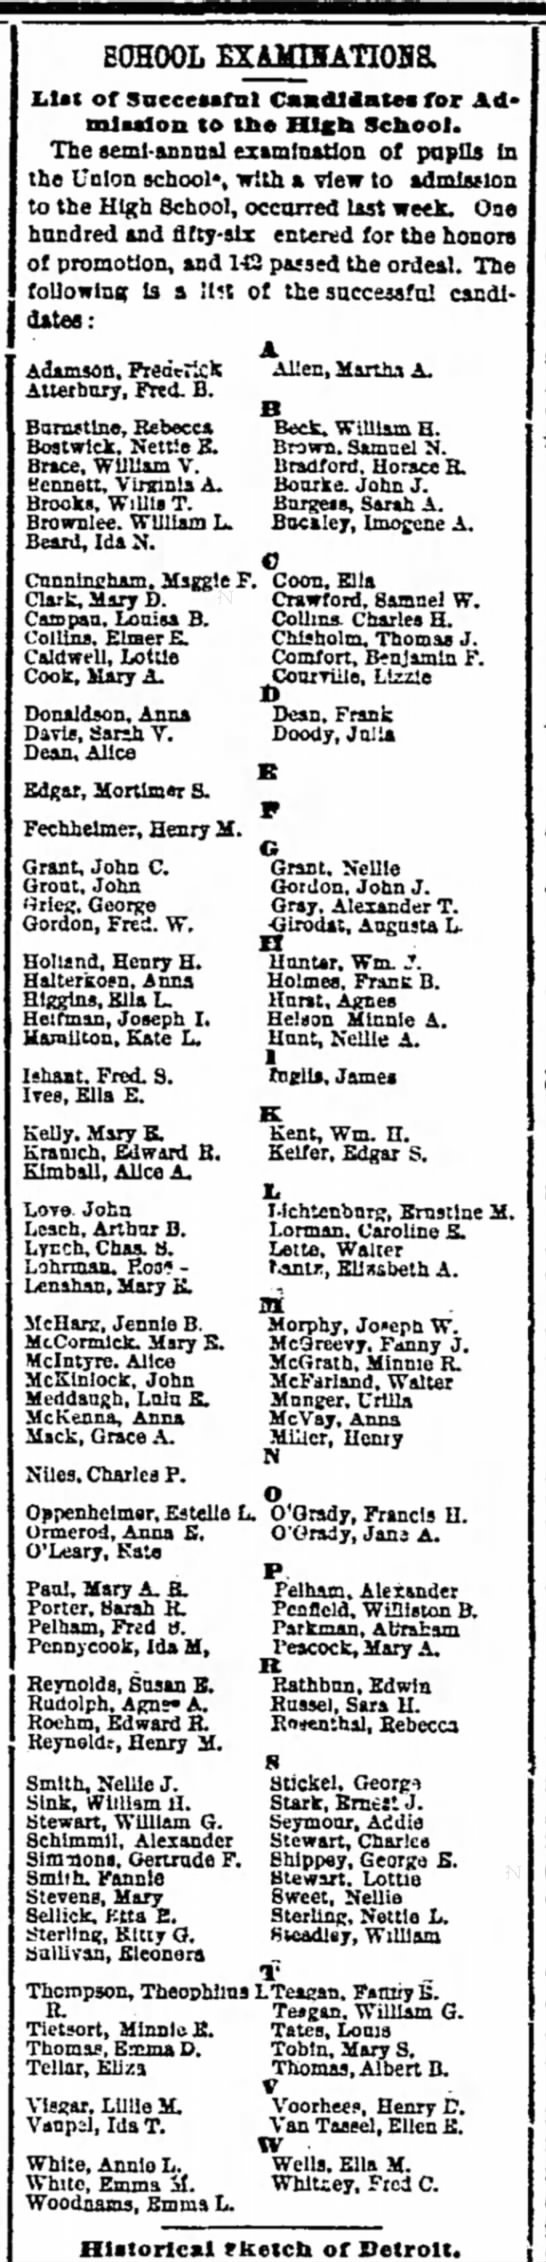 List of successful candidates for admission to the high school--Detroit, 1878 - 